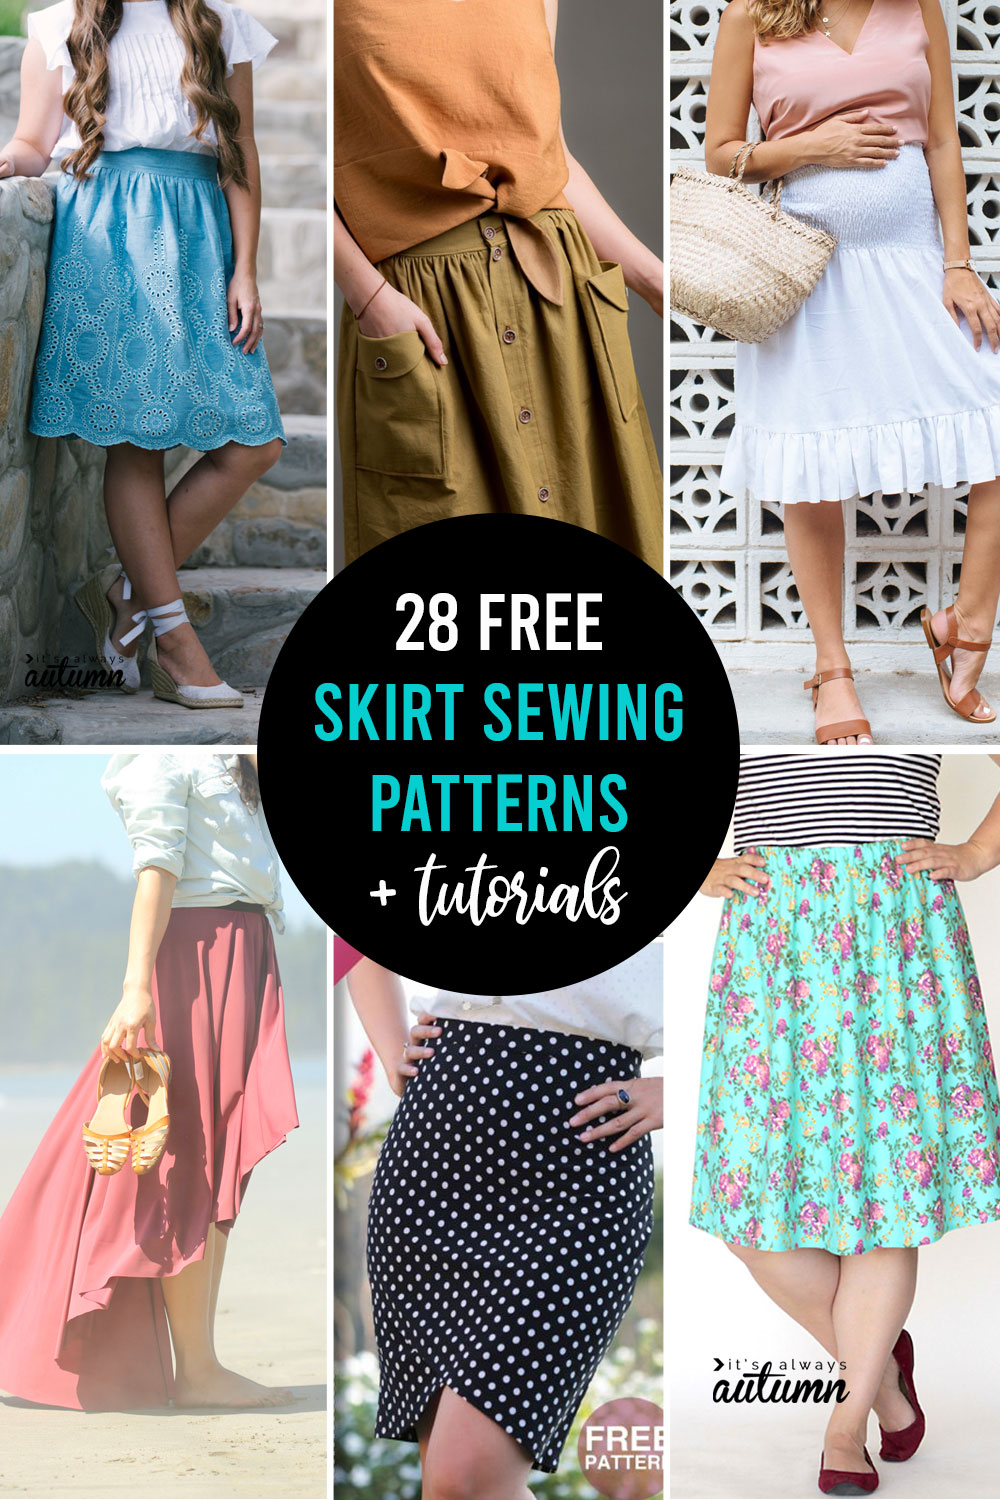 How to Make a Skirt {28 FREE Skirt Patterns} - It's Always Autumn